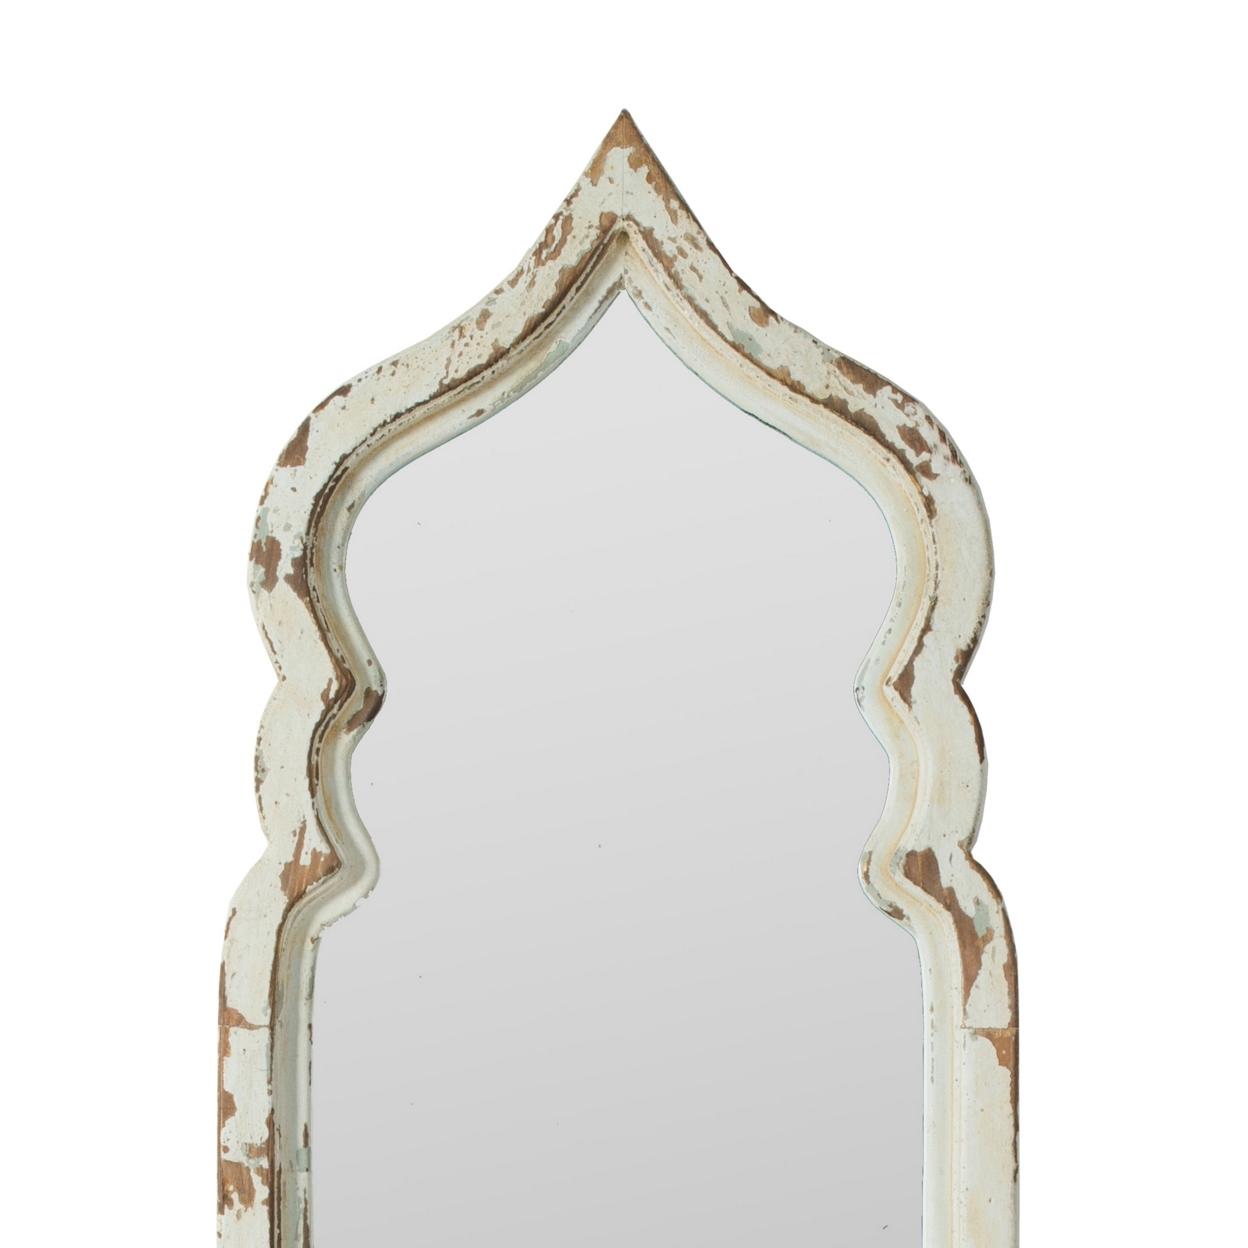 73 Inch Floor Mirror With Ornate Sculpted Top, Fir Wood, Weathered White- Saltoro Sherpi